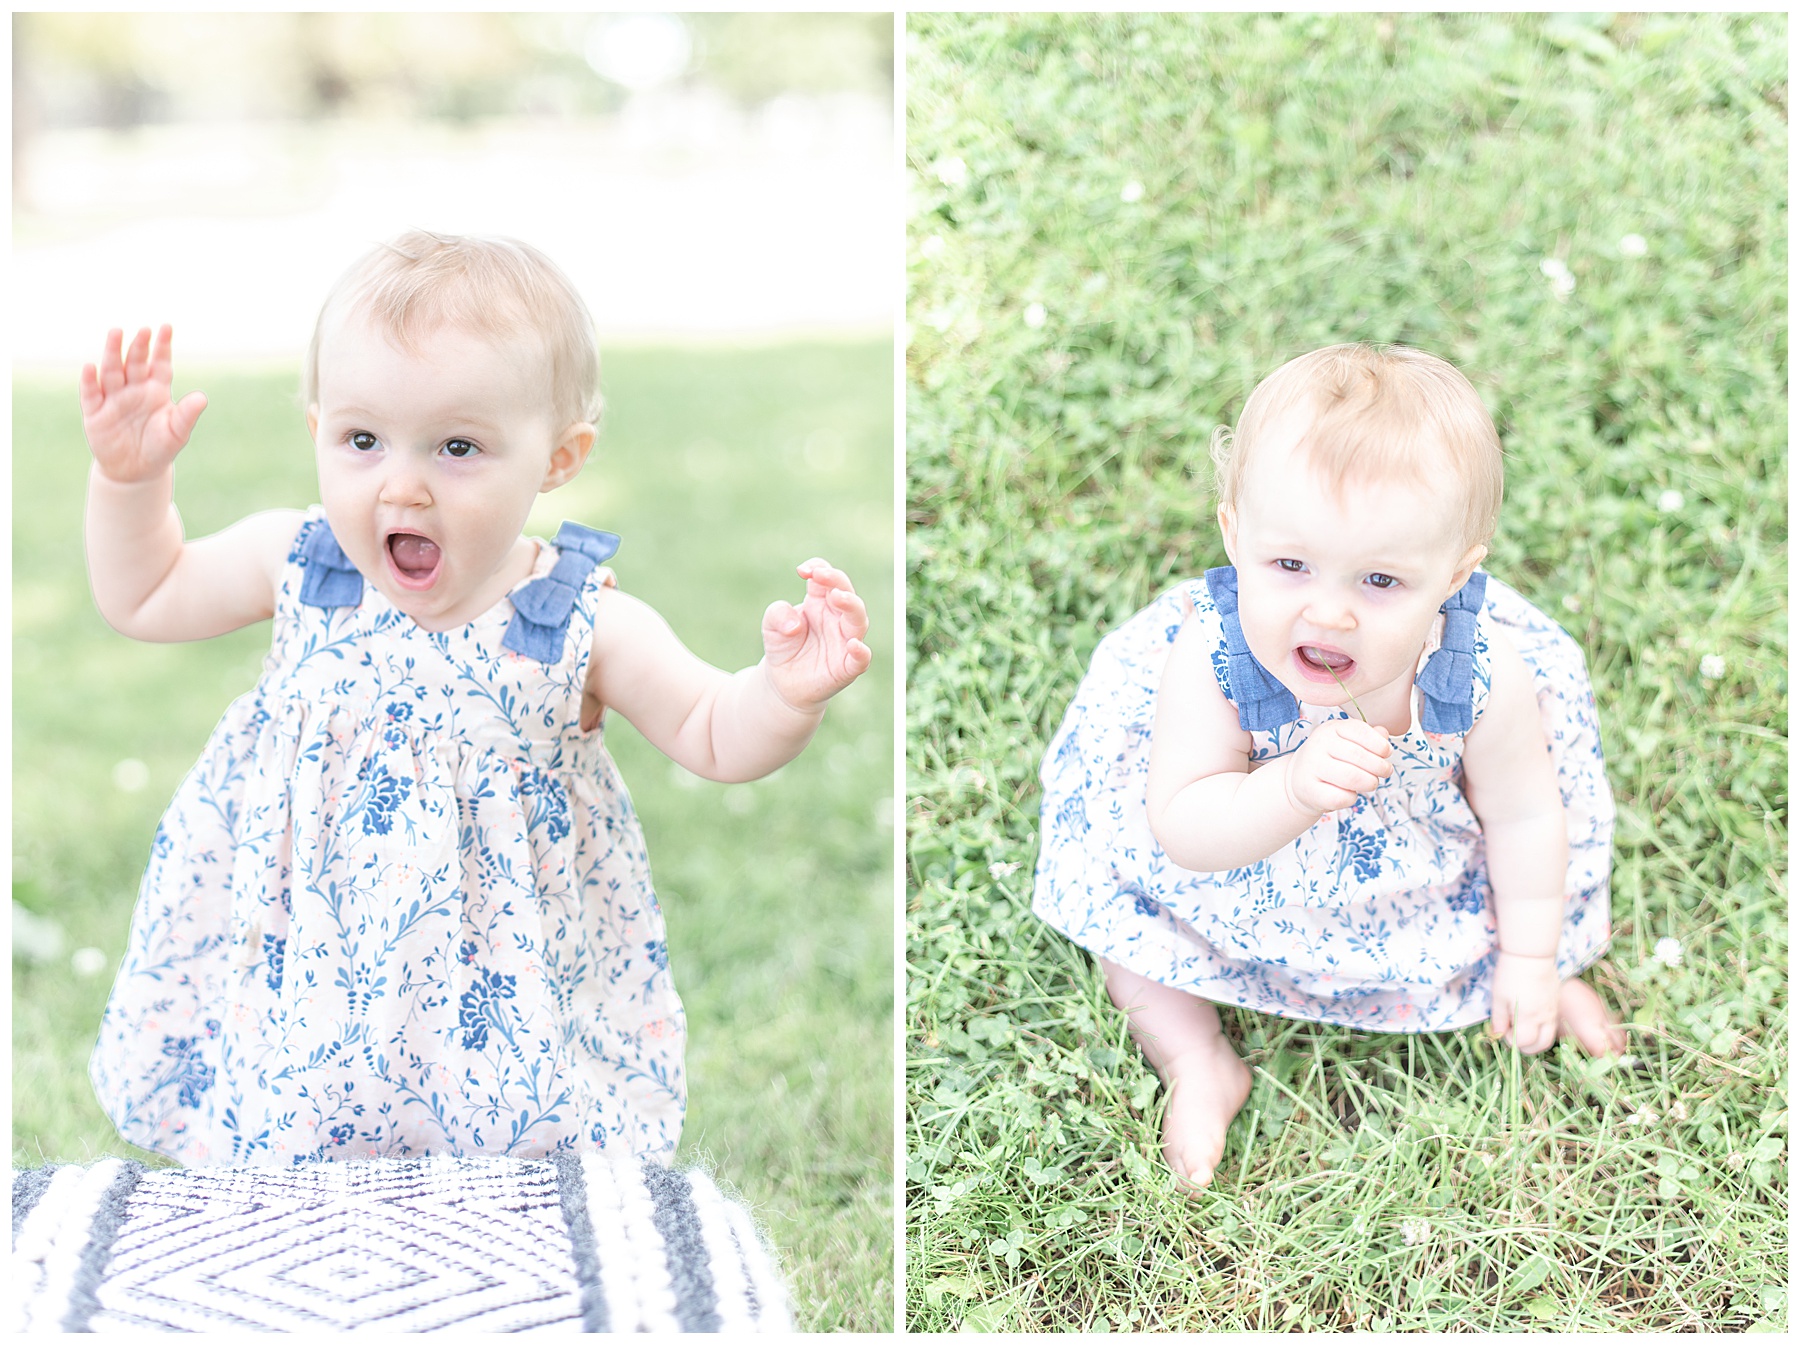 Cake Smash One Year Old Photography Session Wisconsin